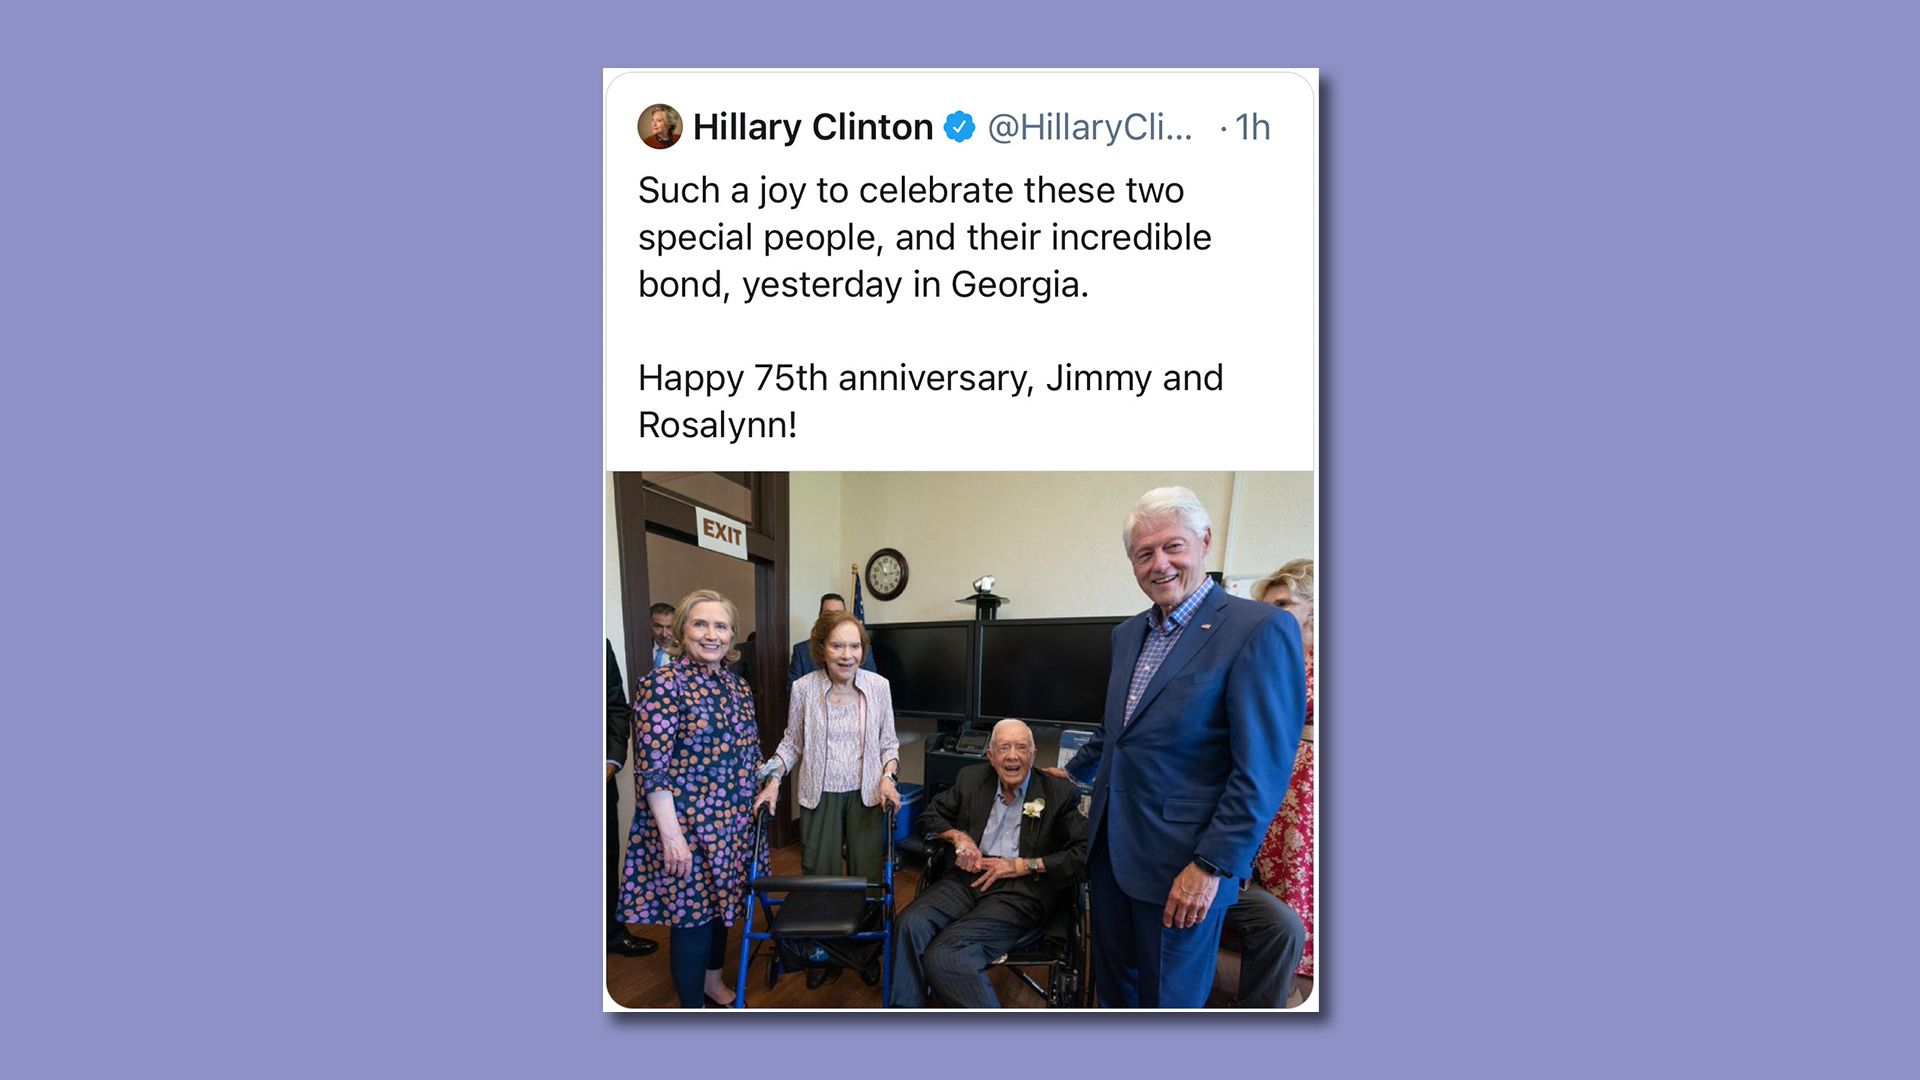 A screenshot shows a tweet from Hillary Clinton congratulating President Carter and his wife, Rosalynn, on their 75th anniversary.